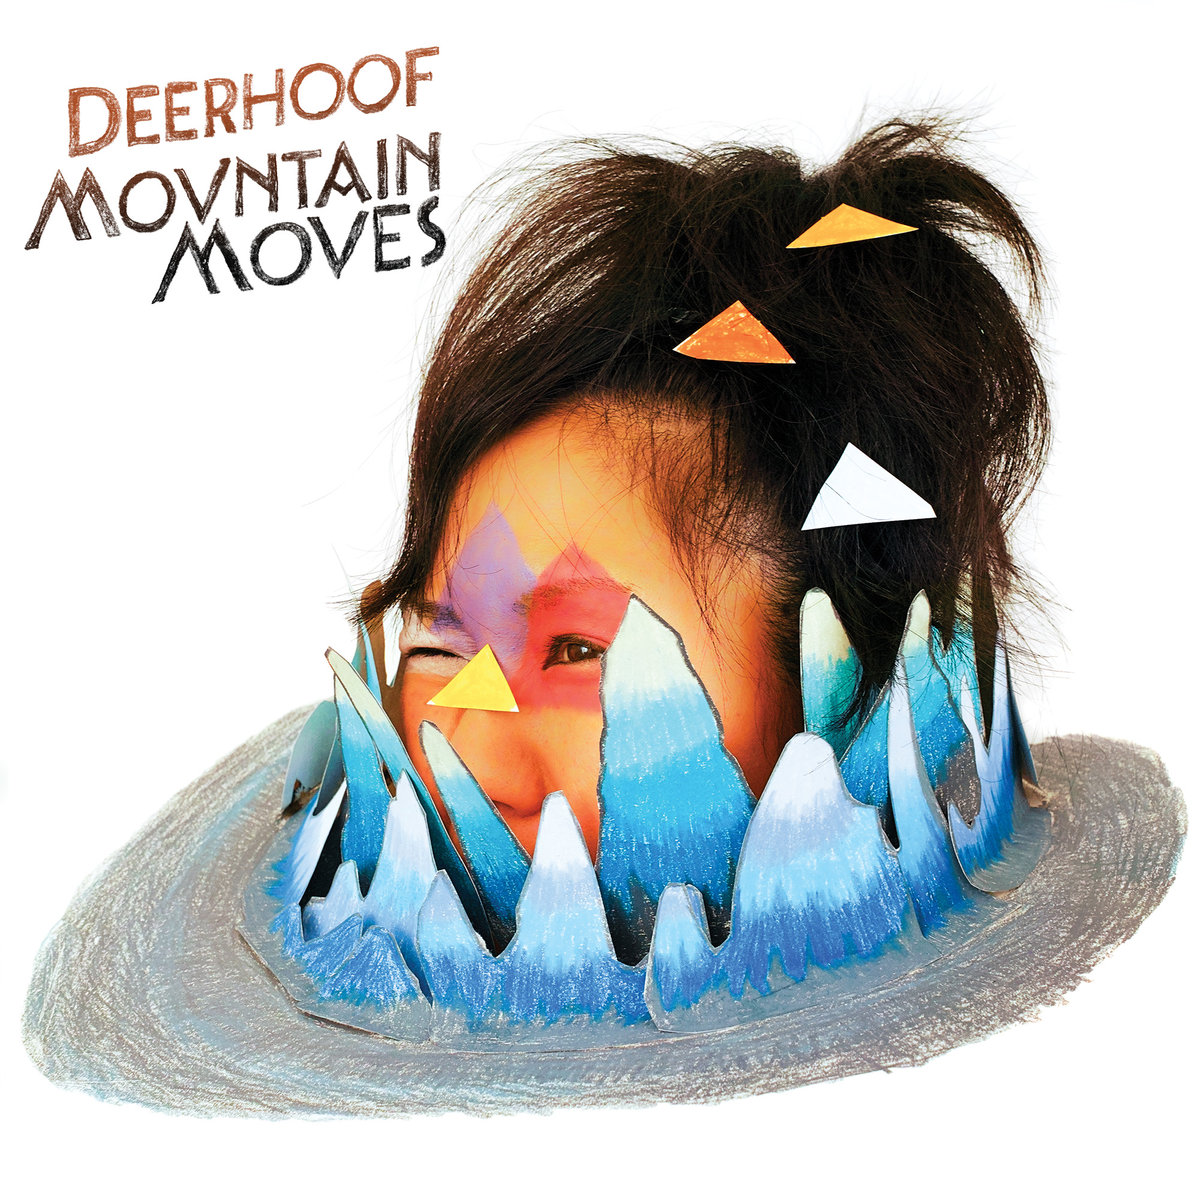 Copy of Copy of Copy of Copy of Deerhoof - Mountain Moves